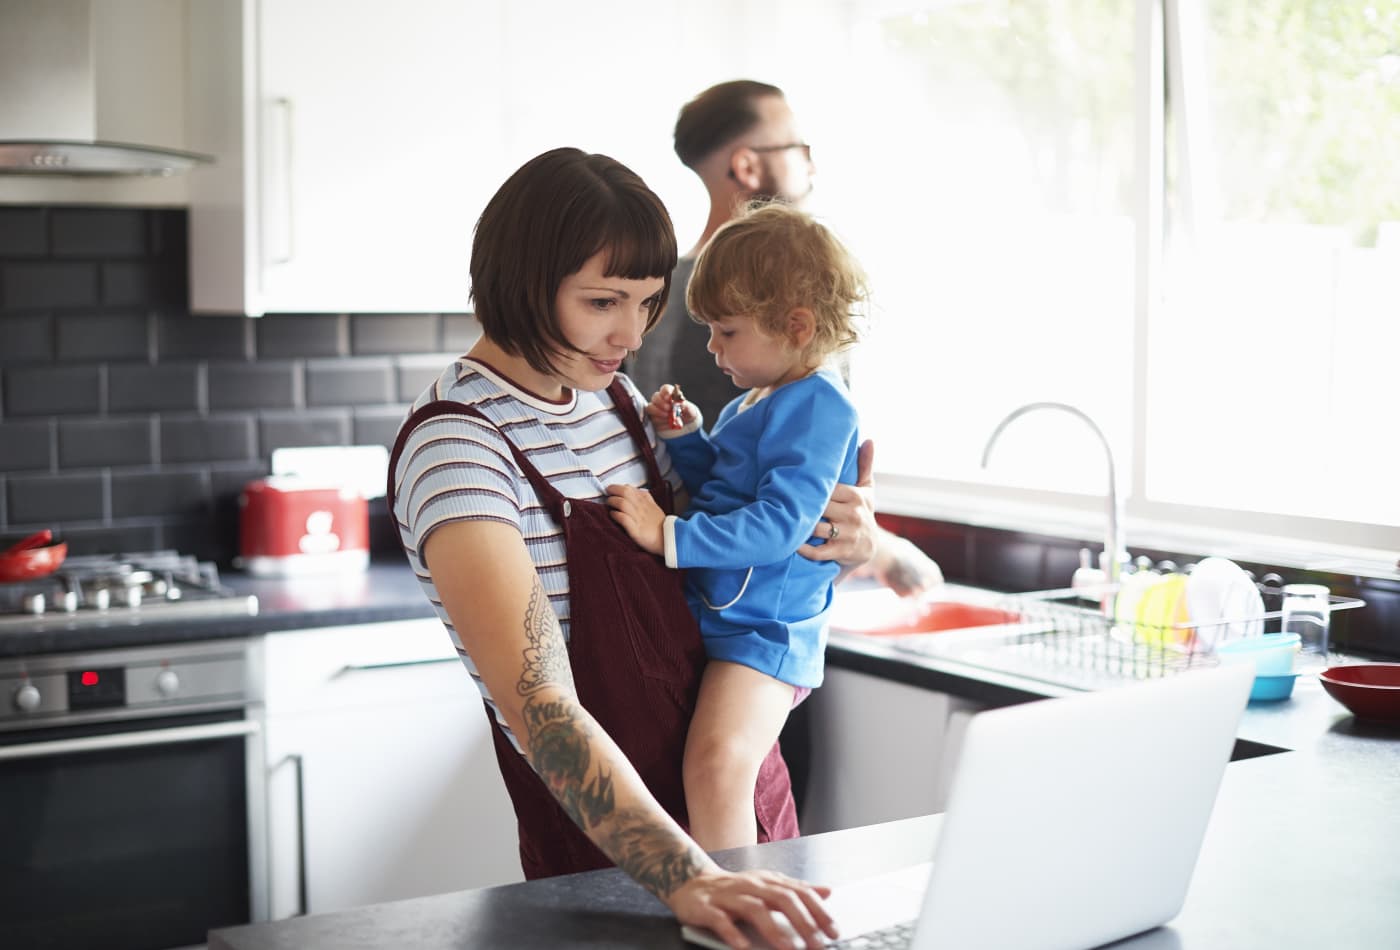 Dad washing up while mum looks after daughter and uses laptop